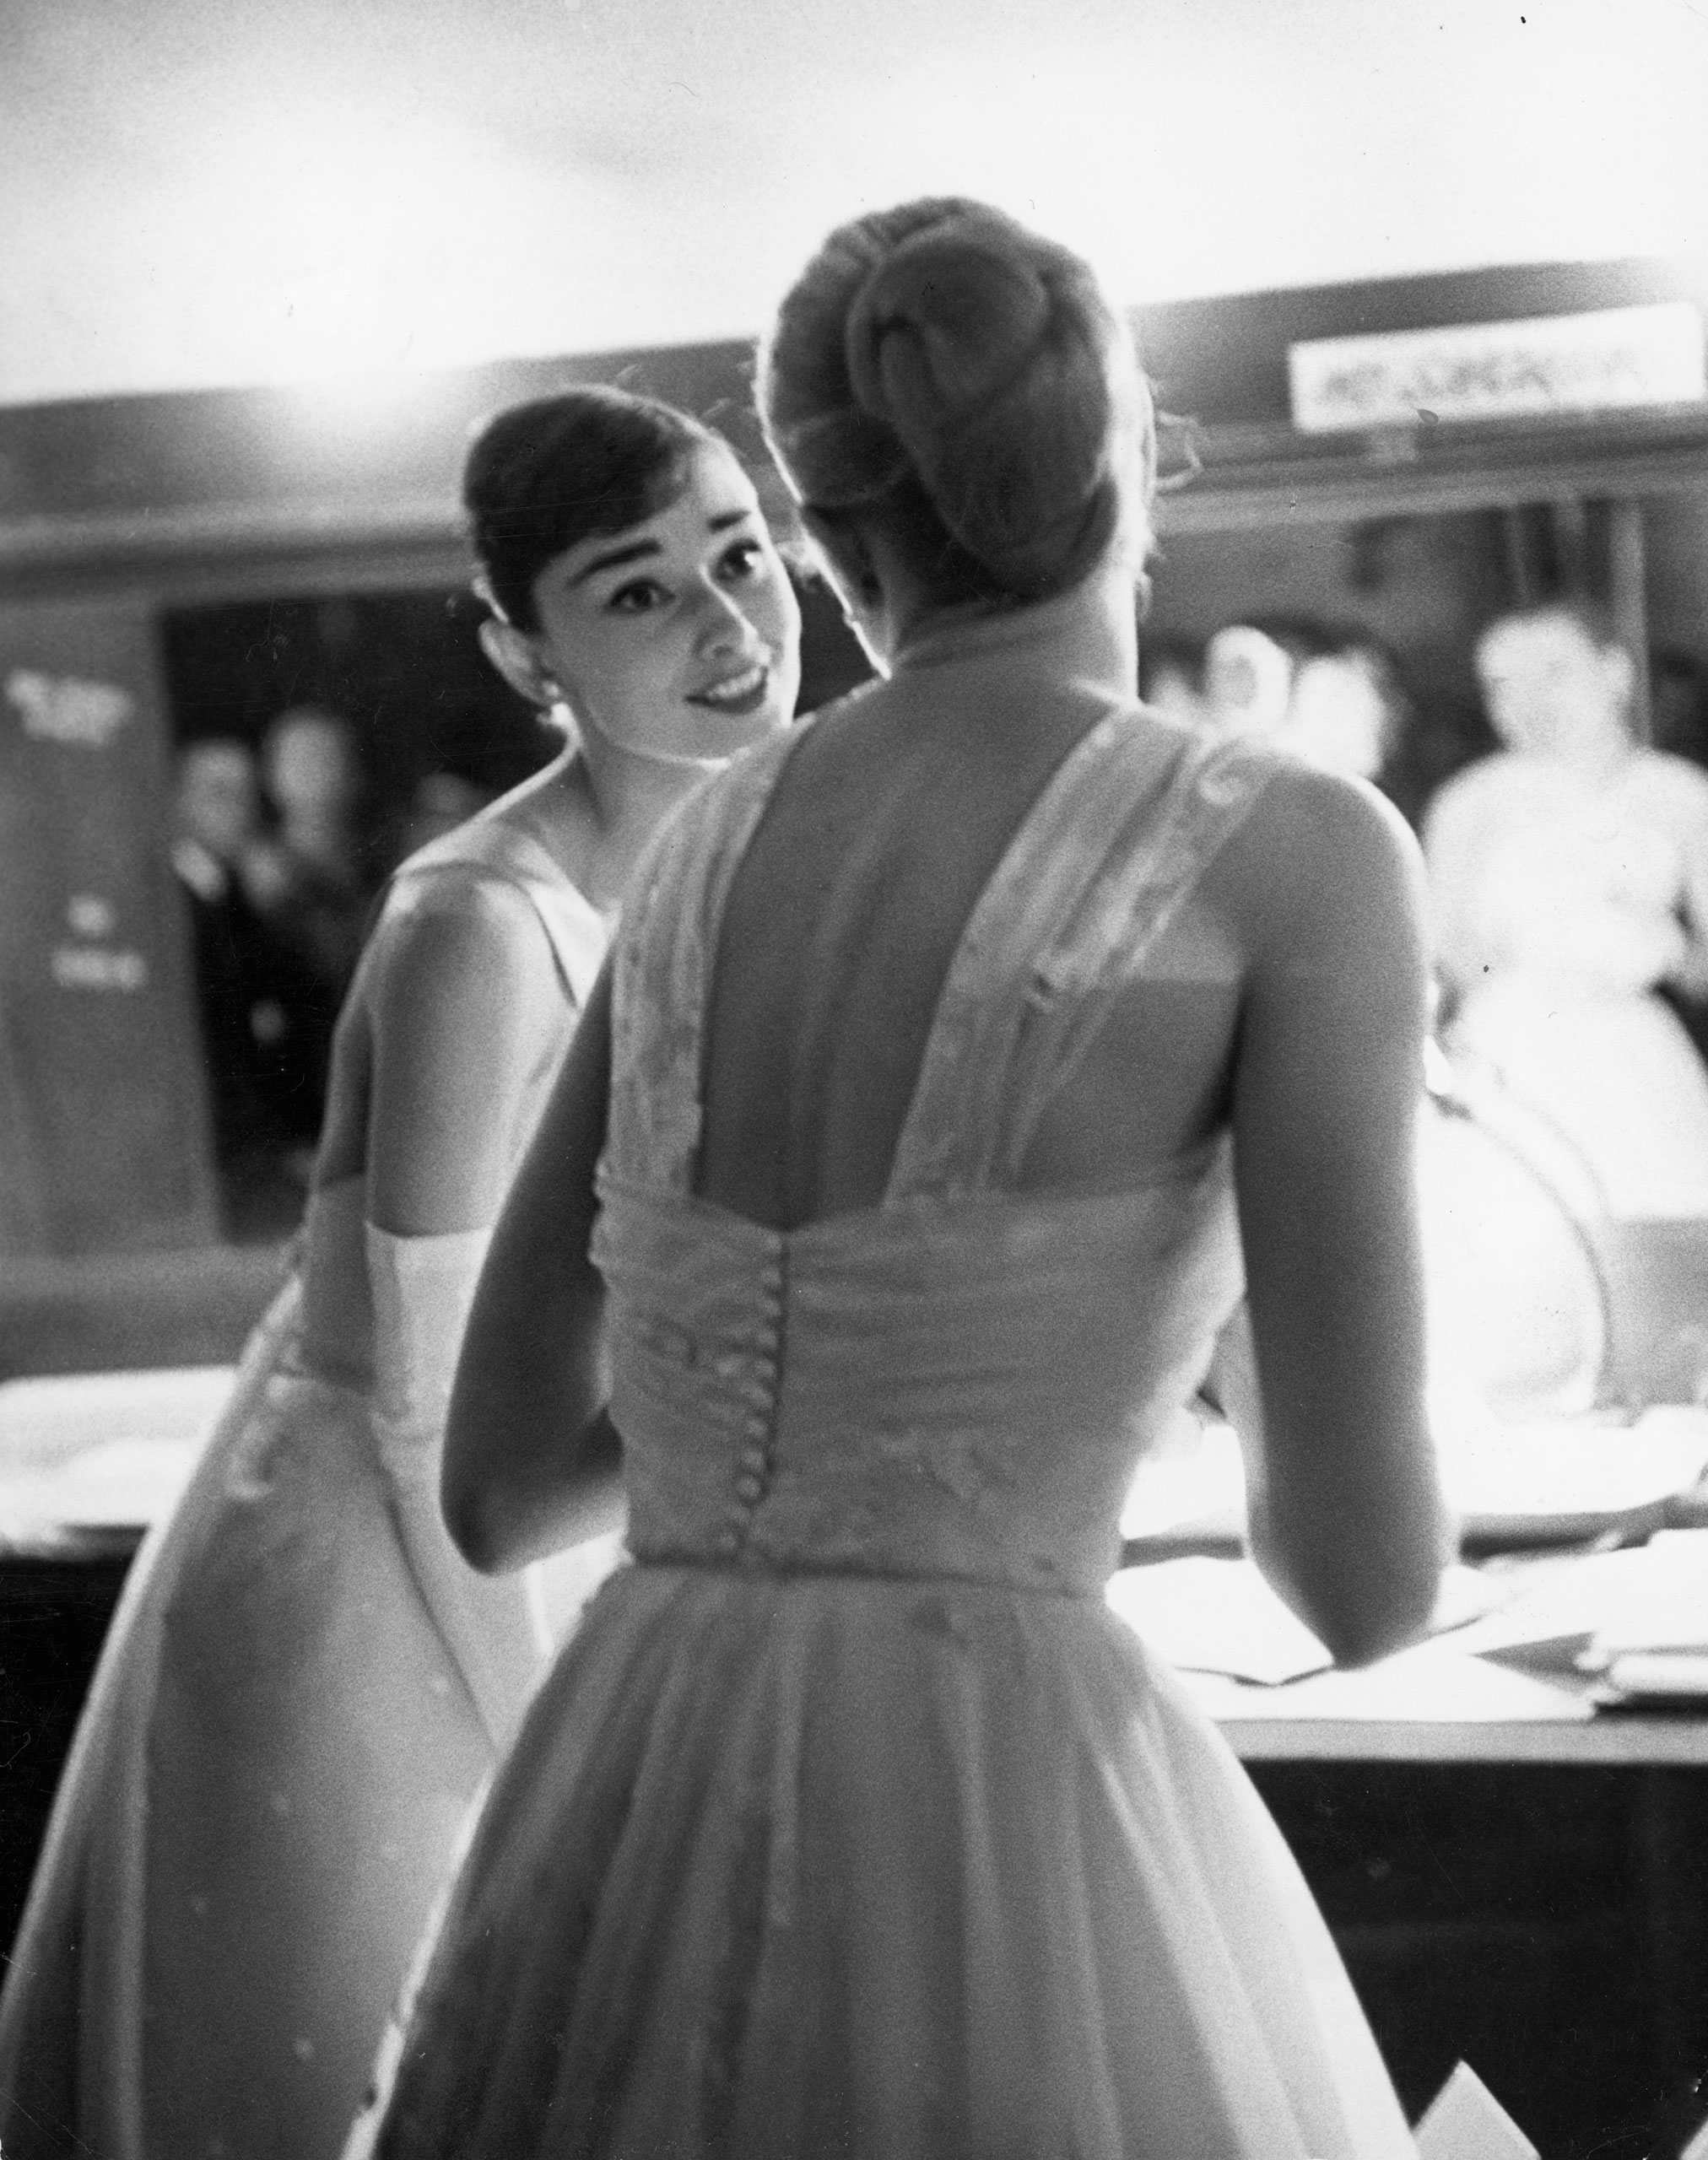 Audrey Hepburn and Grace Kelly backstage at the RKO Pantages Theatre during the 28th Annual Academy Awards, 1956.